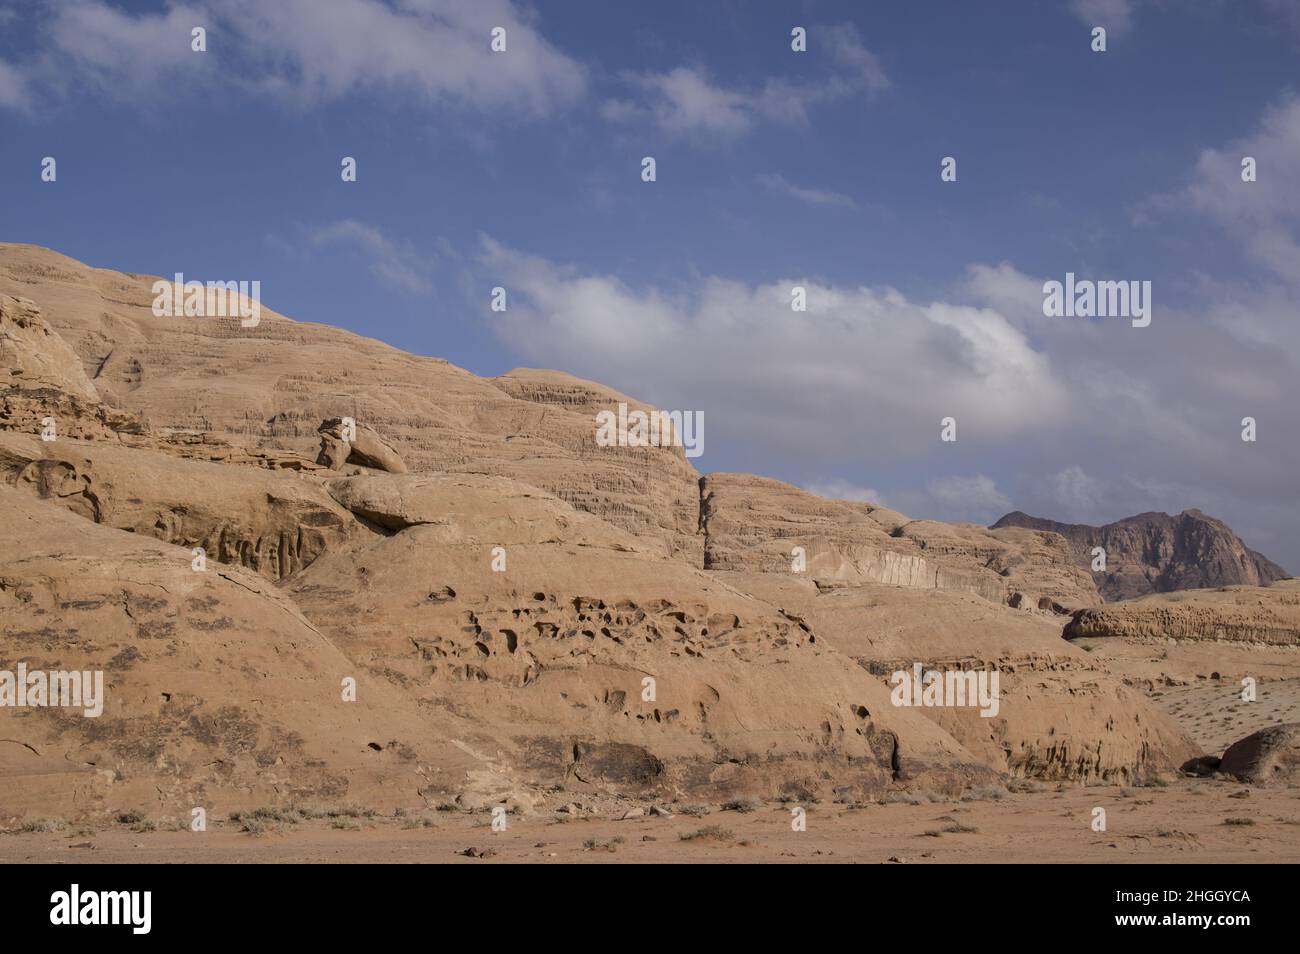 Desert landscape of Wadi Rum, a canyon in Jordan with red sands and cliff walls. Stock Photo